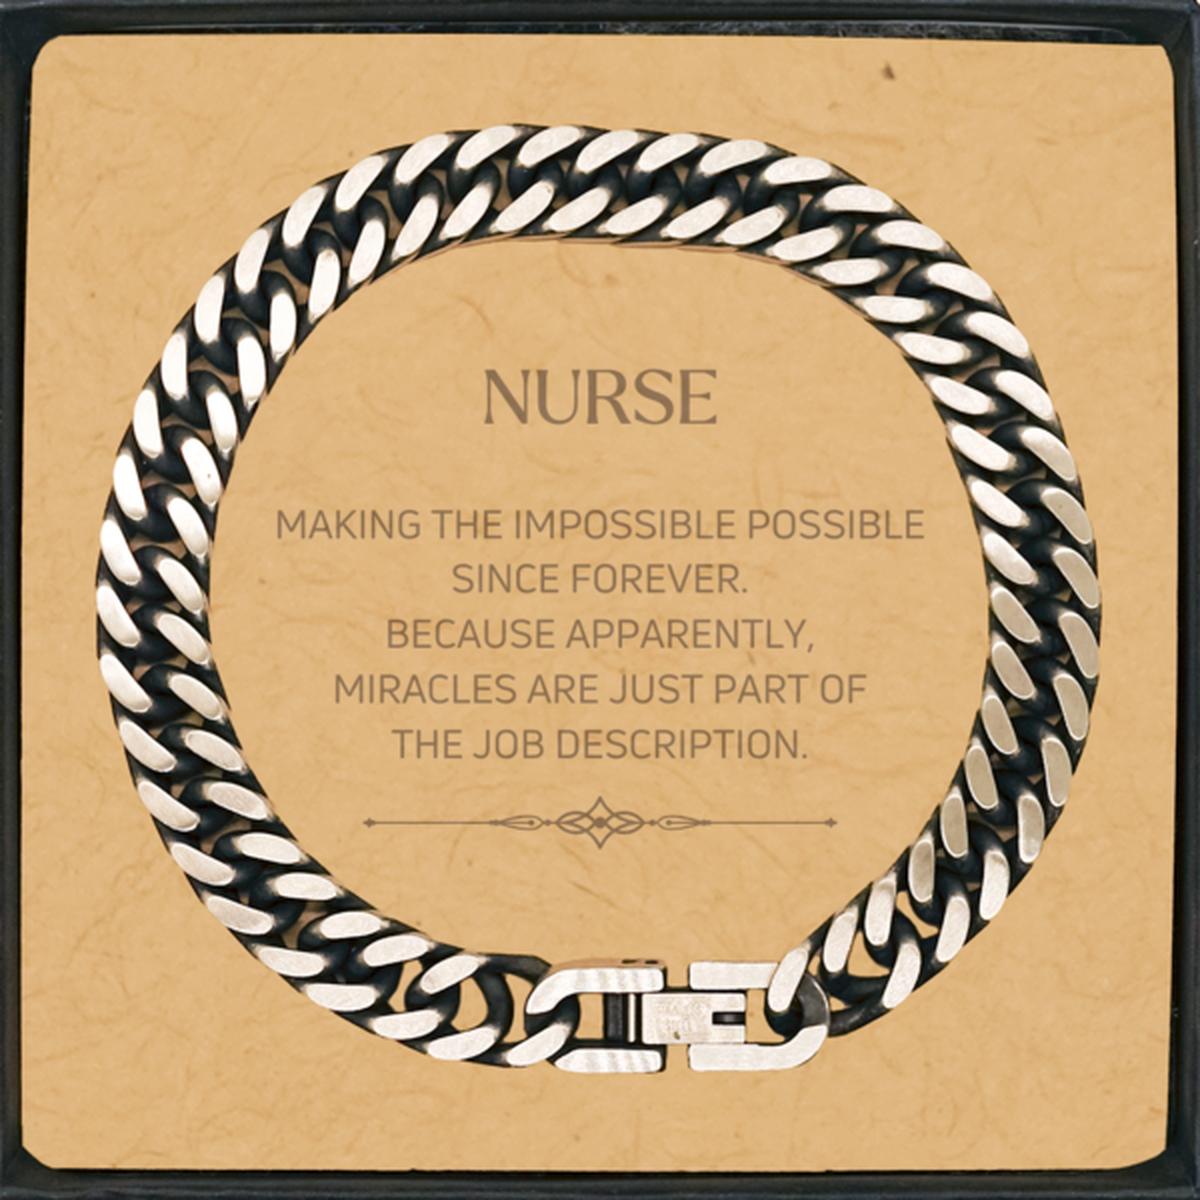 Funny Nurse Gifts, Miracles are just part of the job description, Inspirational Birthday Cuban Link Chain Bracelet For Nurse, Men, Women, Coworkers, Friends, Boss